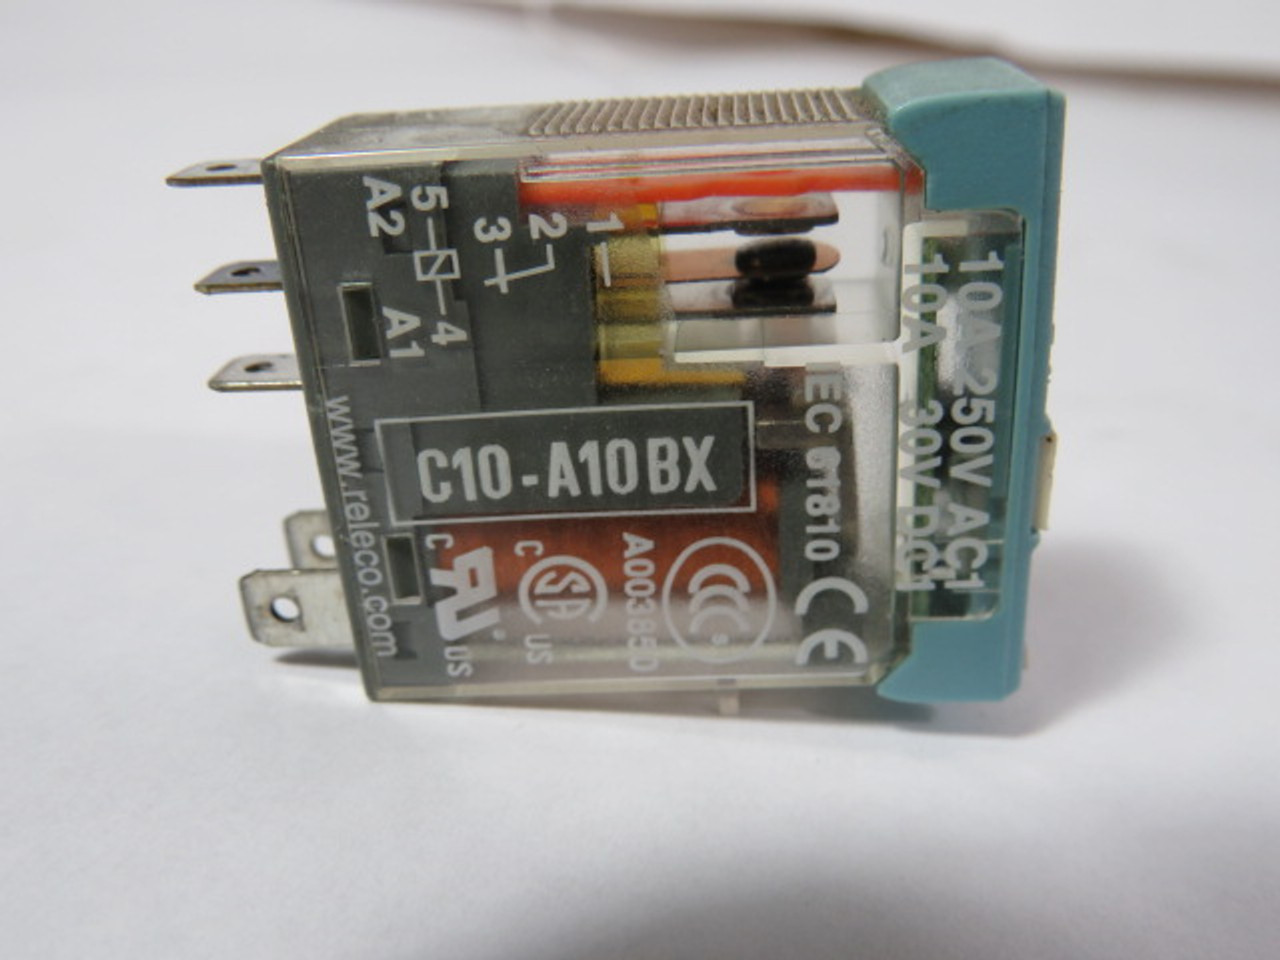 Releco C10-A10BX-ADC24V Bridge Rectifier Relay 24VAC/EDC 10A 5 PIN  USED